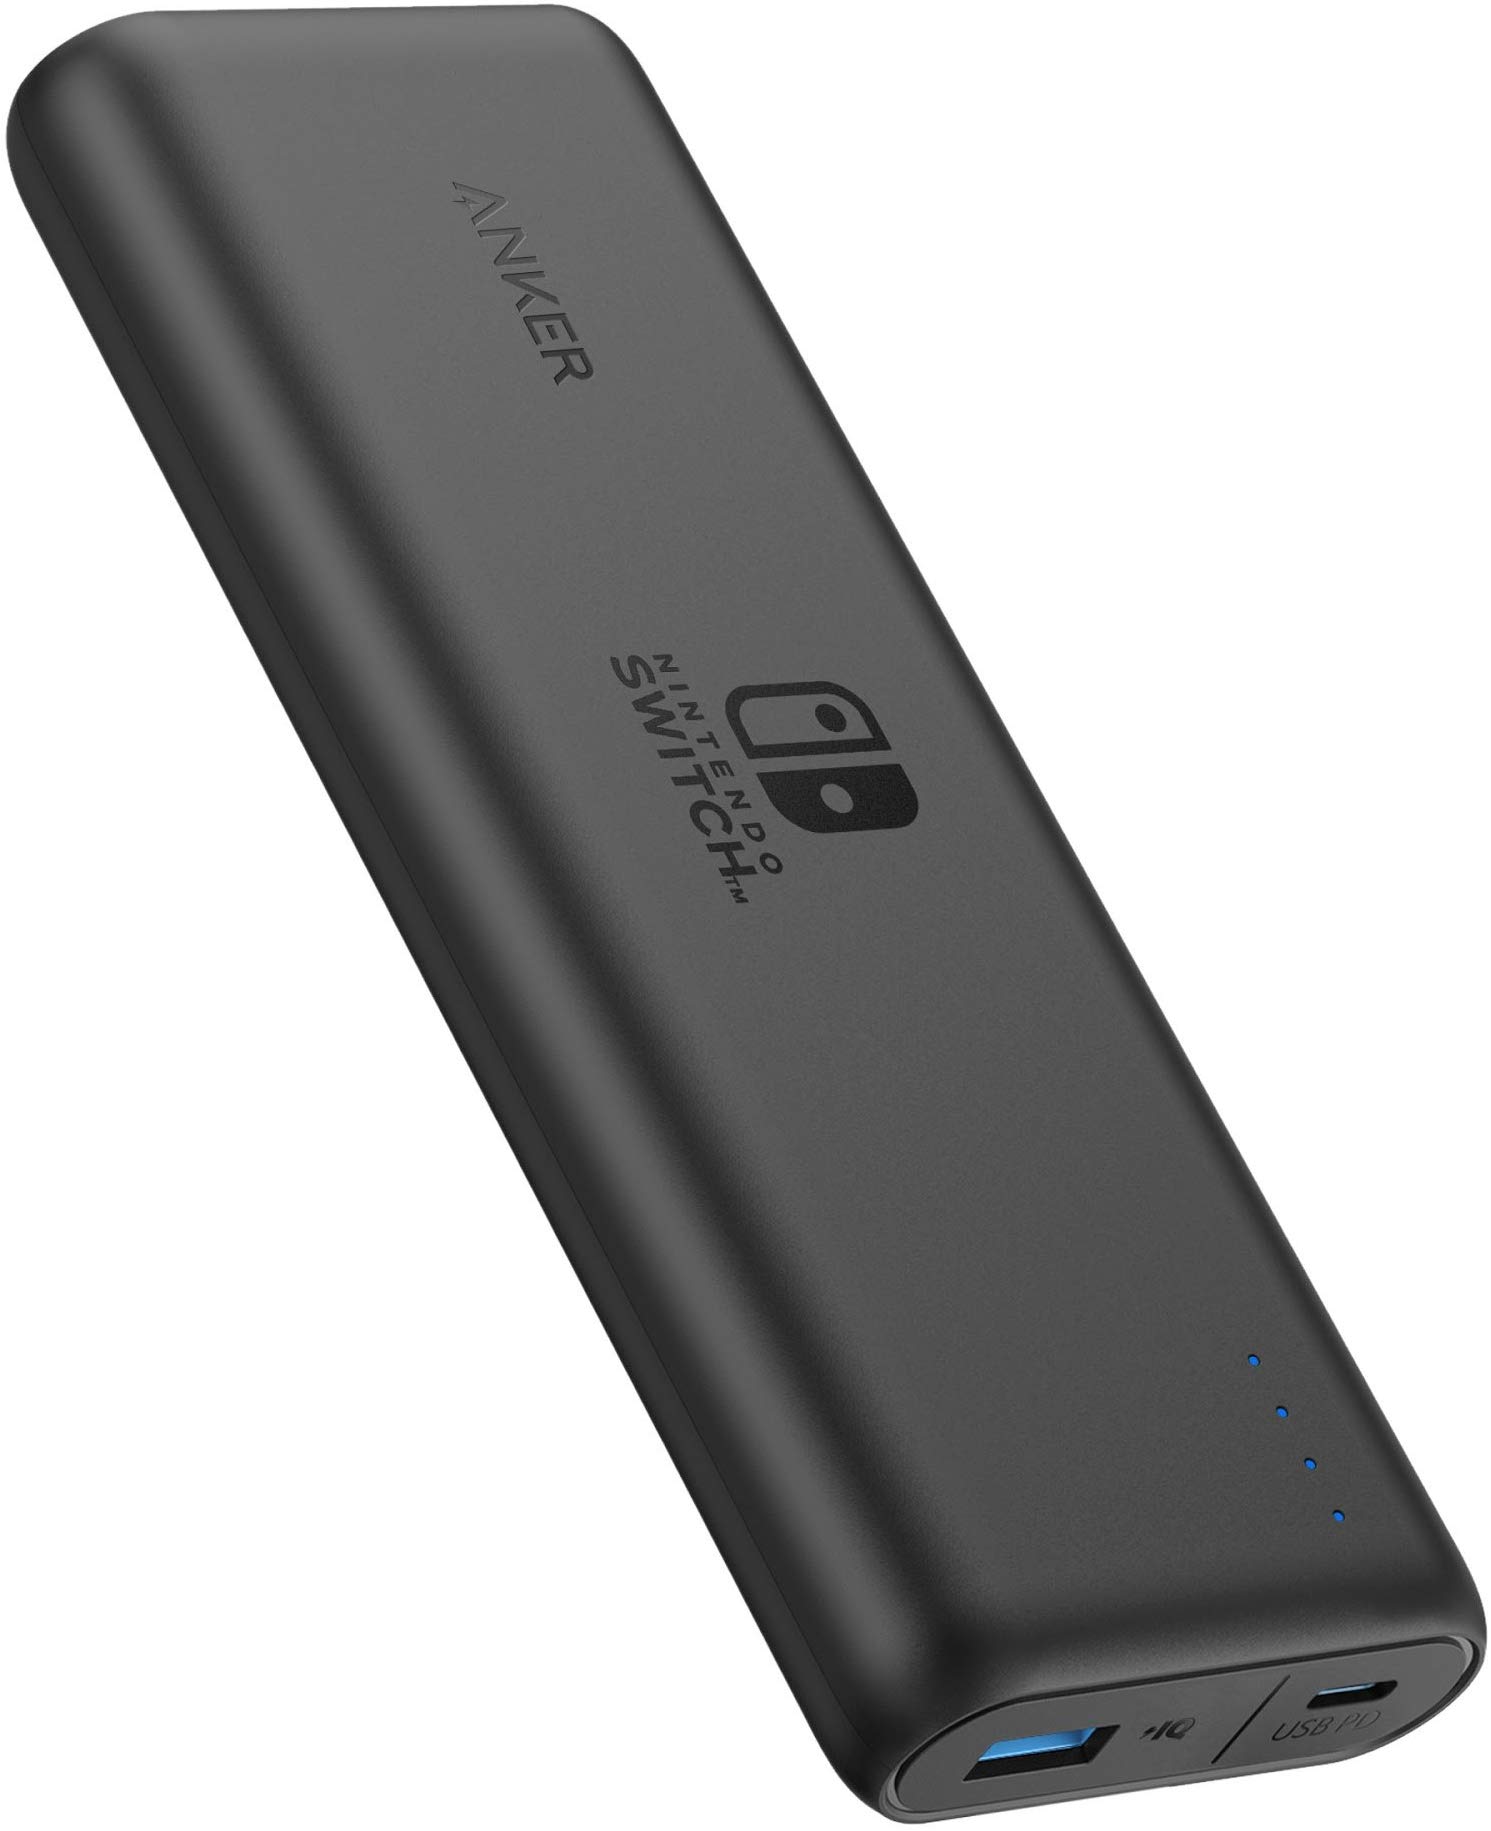 Best Battery Backup for Your Nintendo Switch Anker PowerCore Nintend Switch Edition